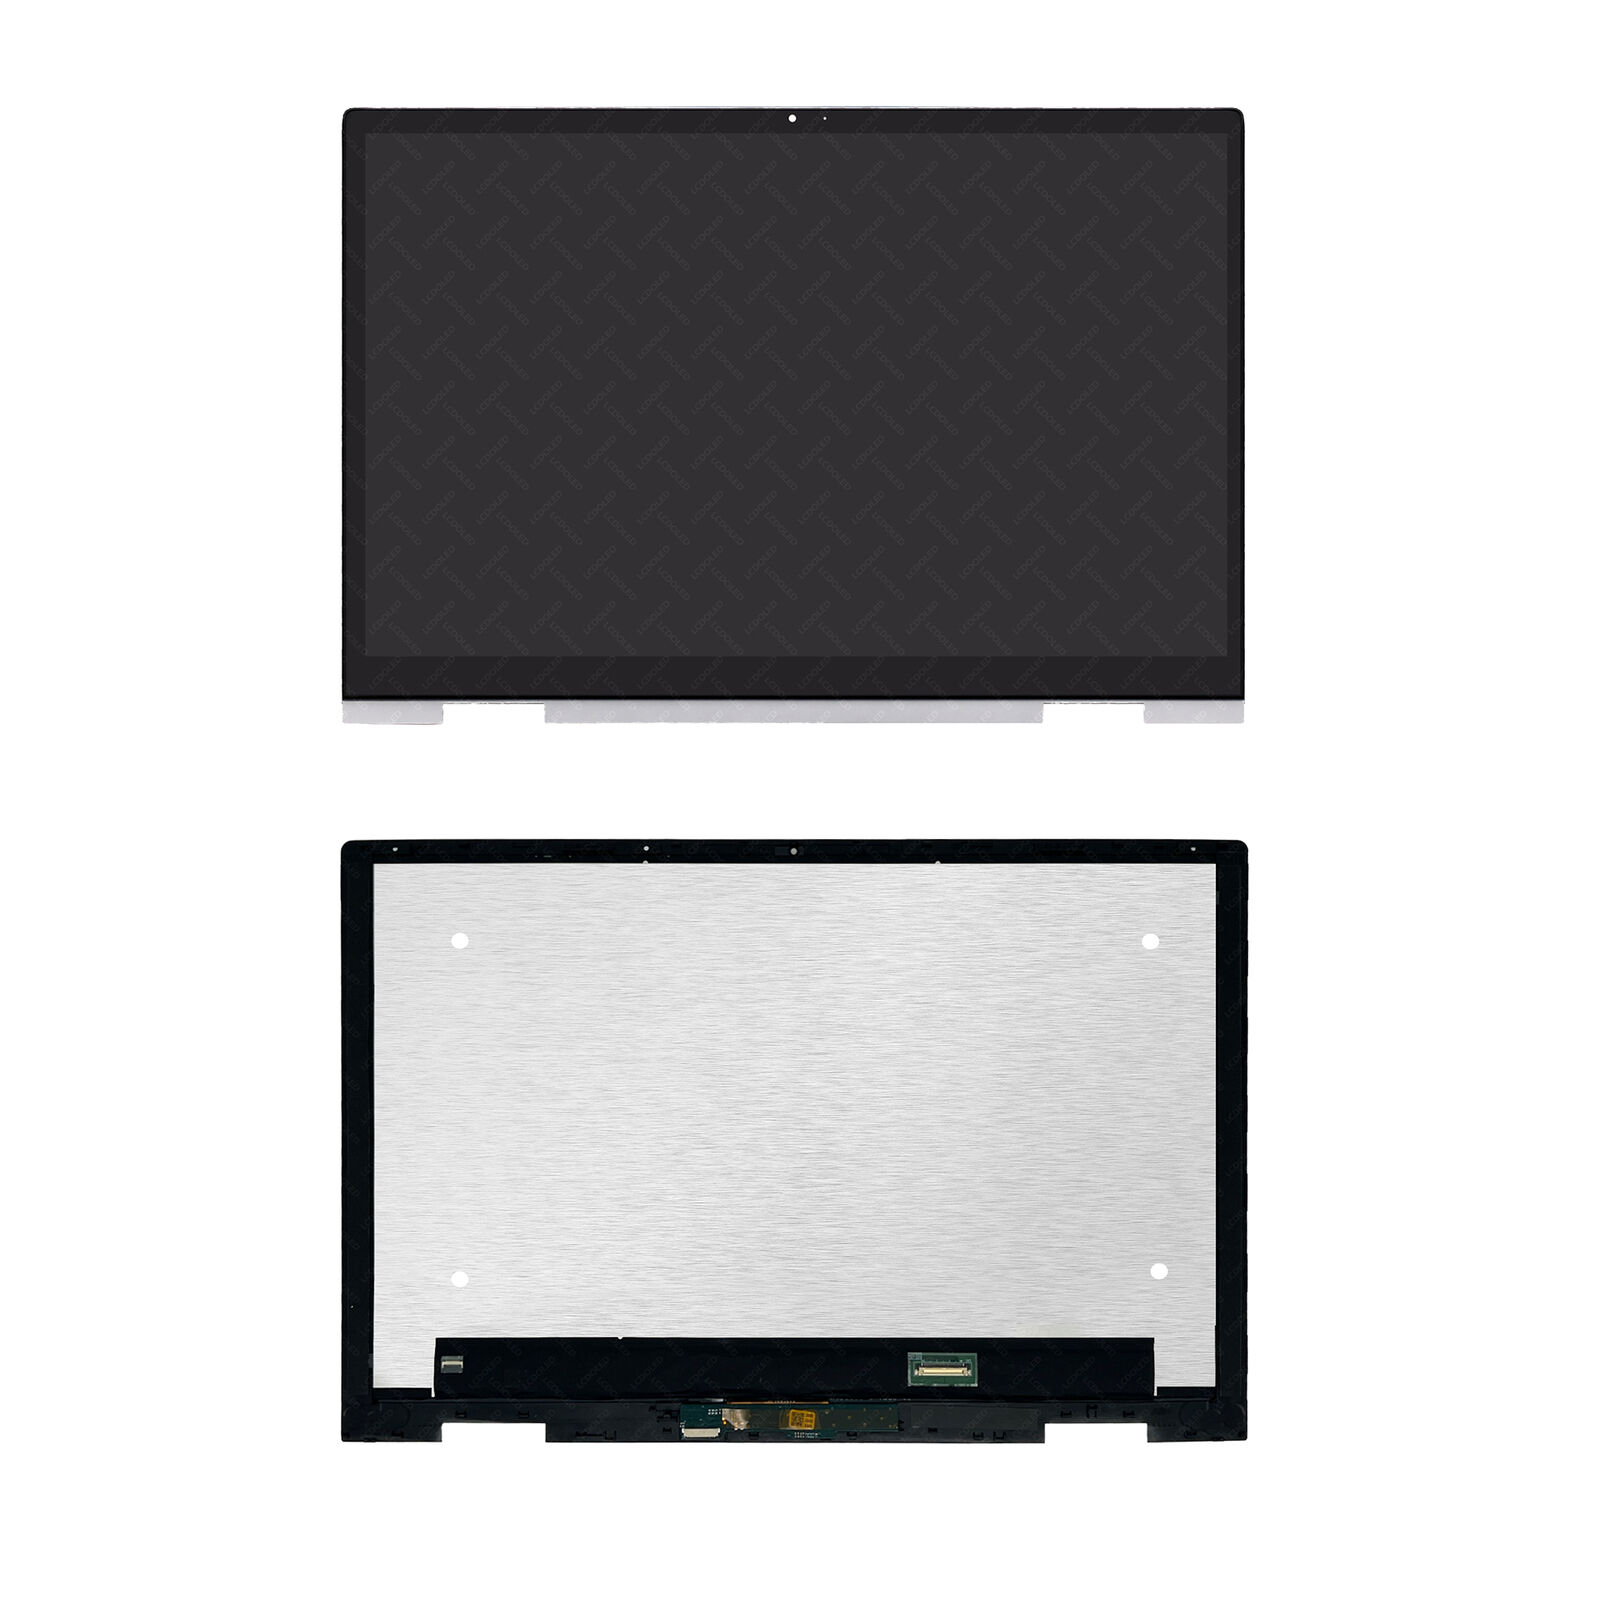 L93181-001 LCD Touch Screen Assembly For HP ENVY X360 15M-EE0013DX 15M-EE0023DX